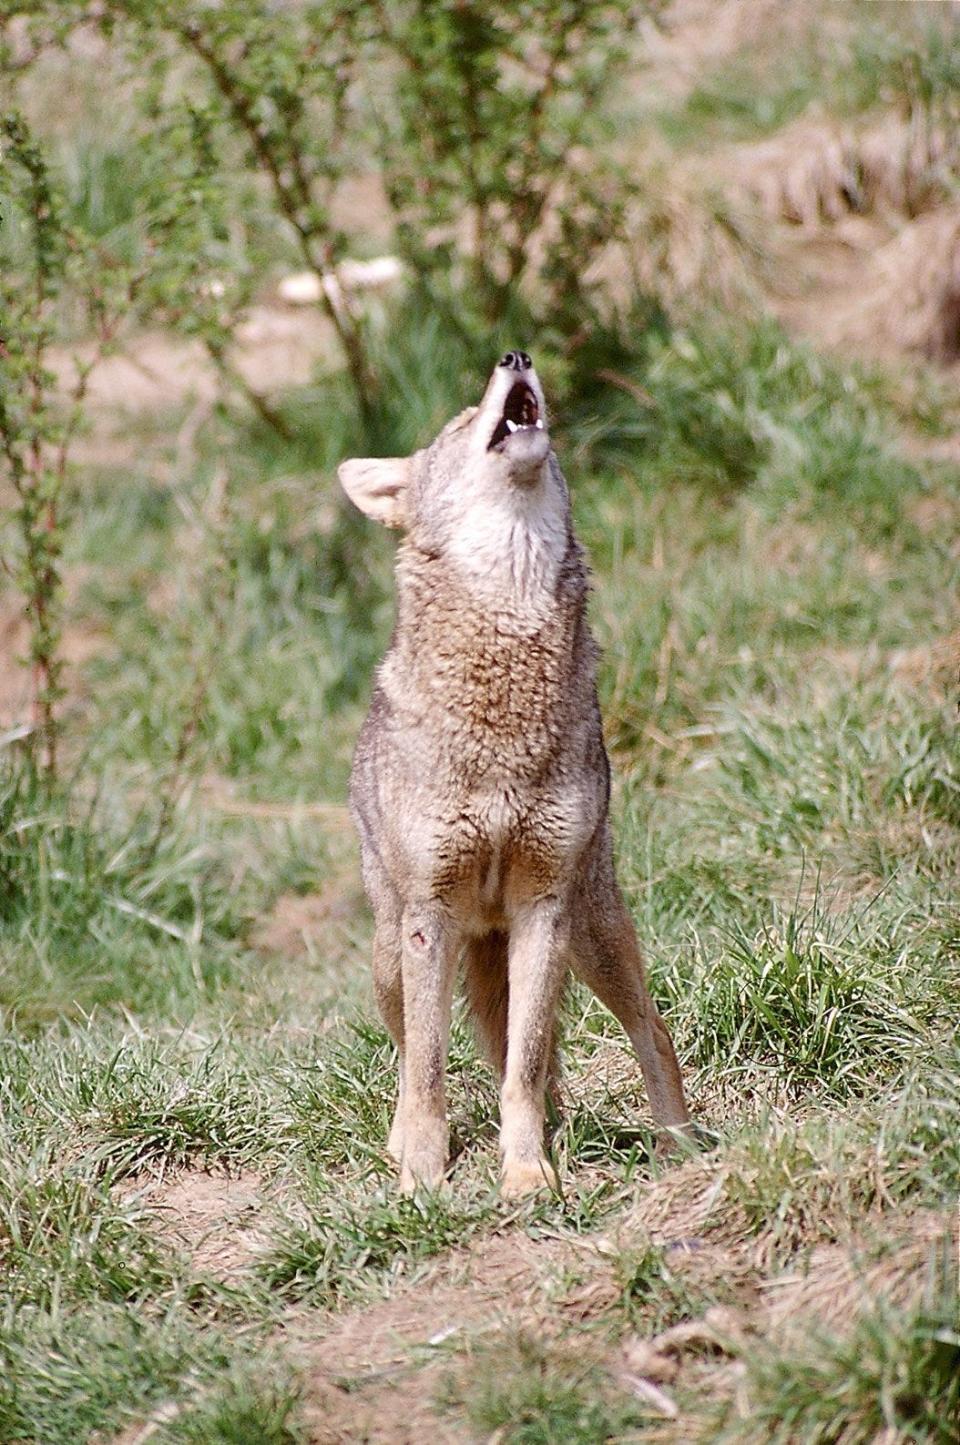 Experts say mice, rabbits or birds are the likely prey for coyotes, who tend to shy away from anything bigger than them.